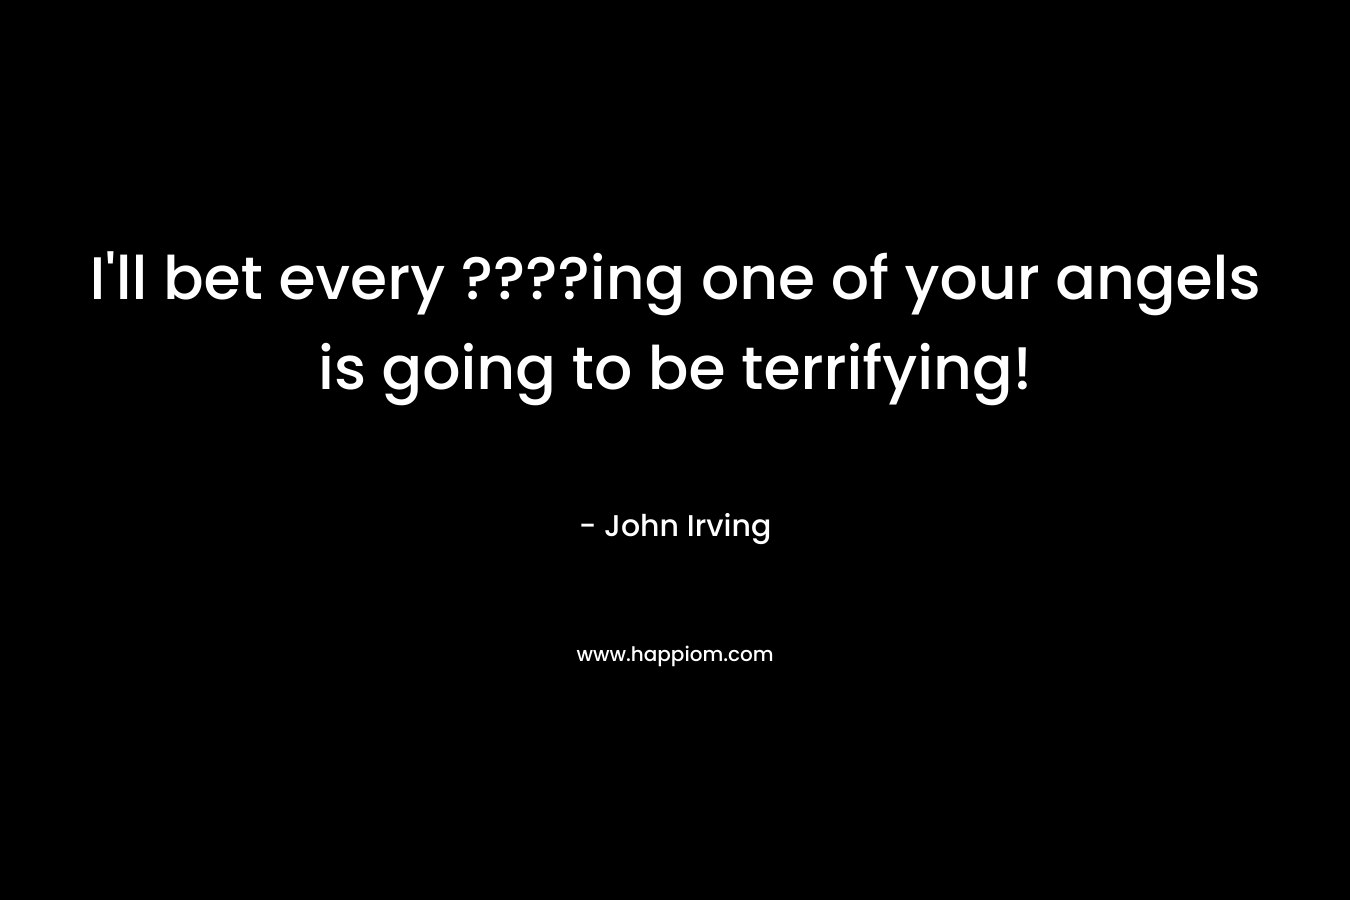 I’ll bet every ????ing one of your angels is going to be terrifying! – John Irving